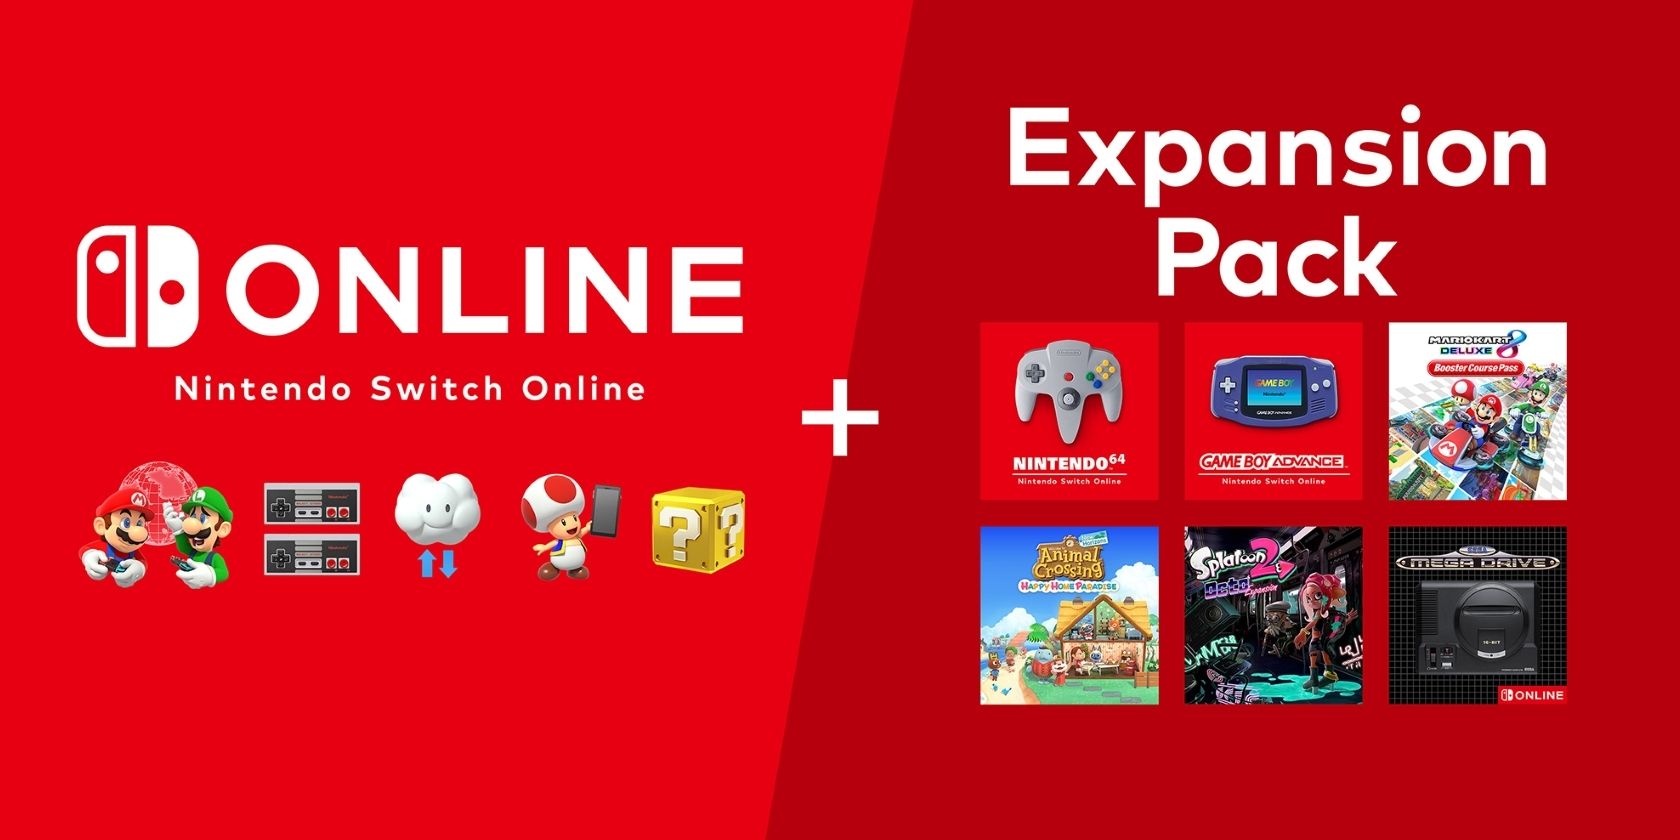 A screenshot of an official advertisement for Nintendo Switch Online and the Expansion Pack 